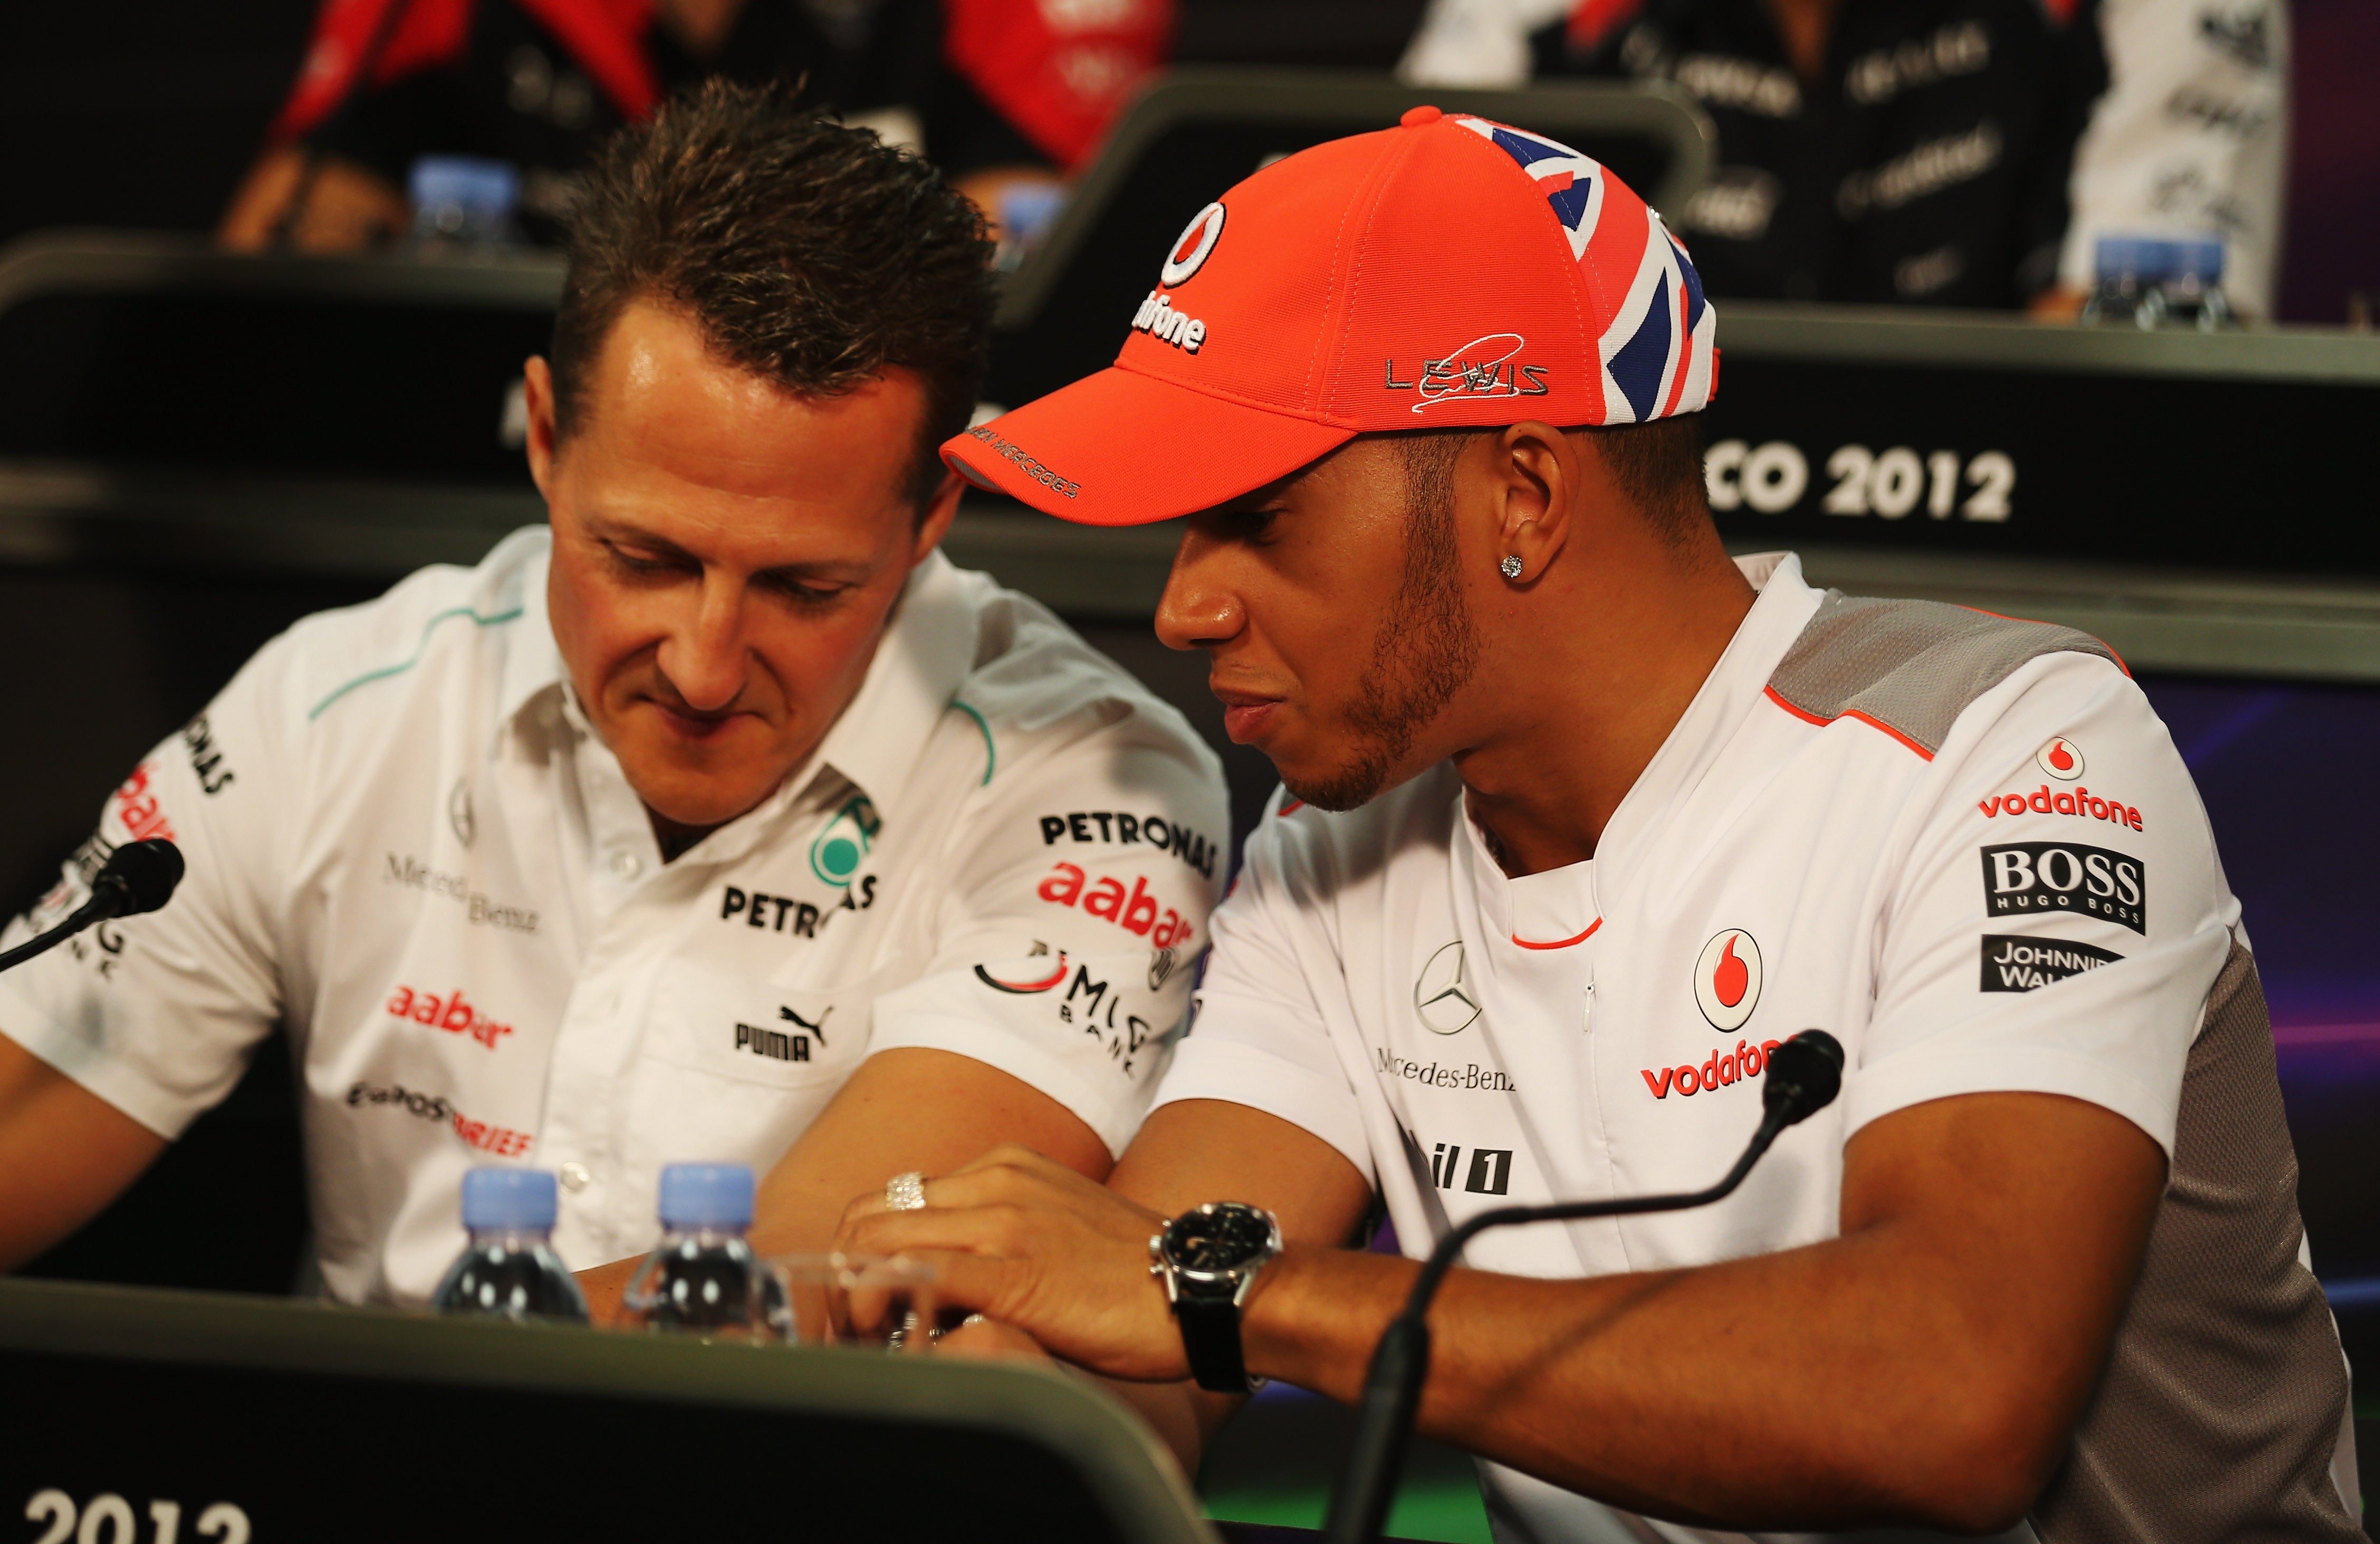 Lewis Hamilton and Michael Schumacher at the drivers’ press conference at the Monte Carlo Circuit